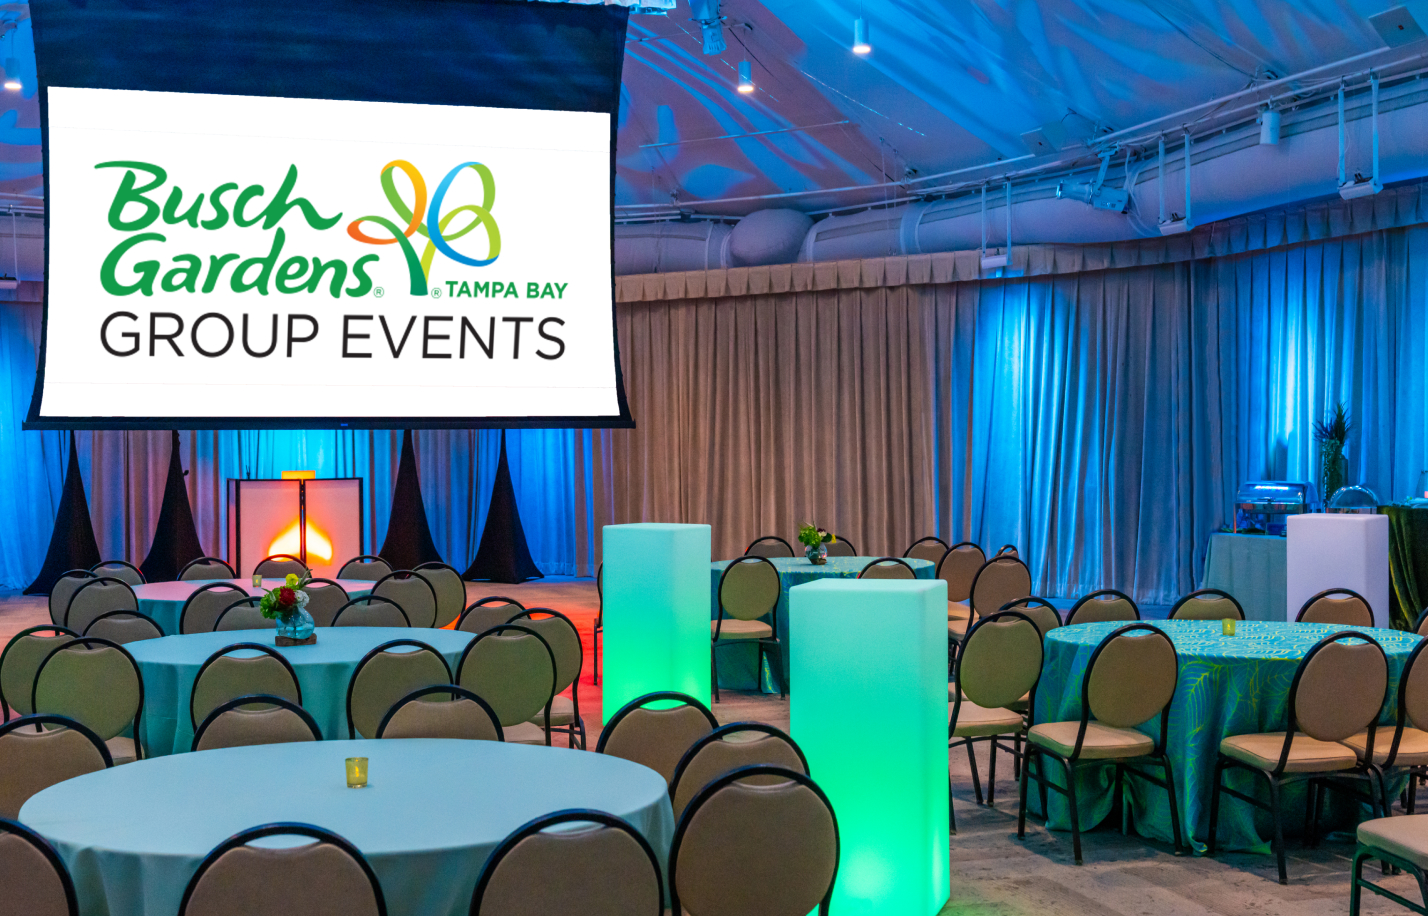 If you're looking for a change of scenery away from your every-day conference room, then Busch Gardens Tampa Bay meetings may be the right solution.